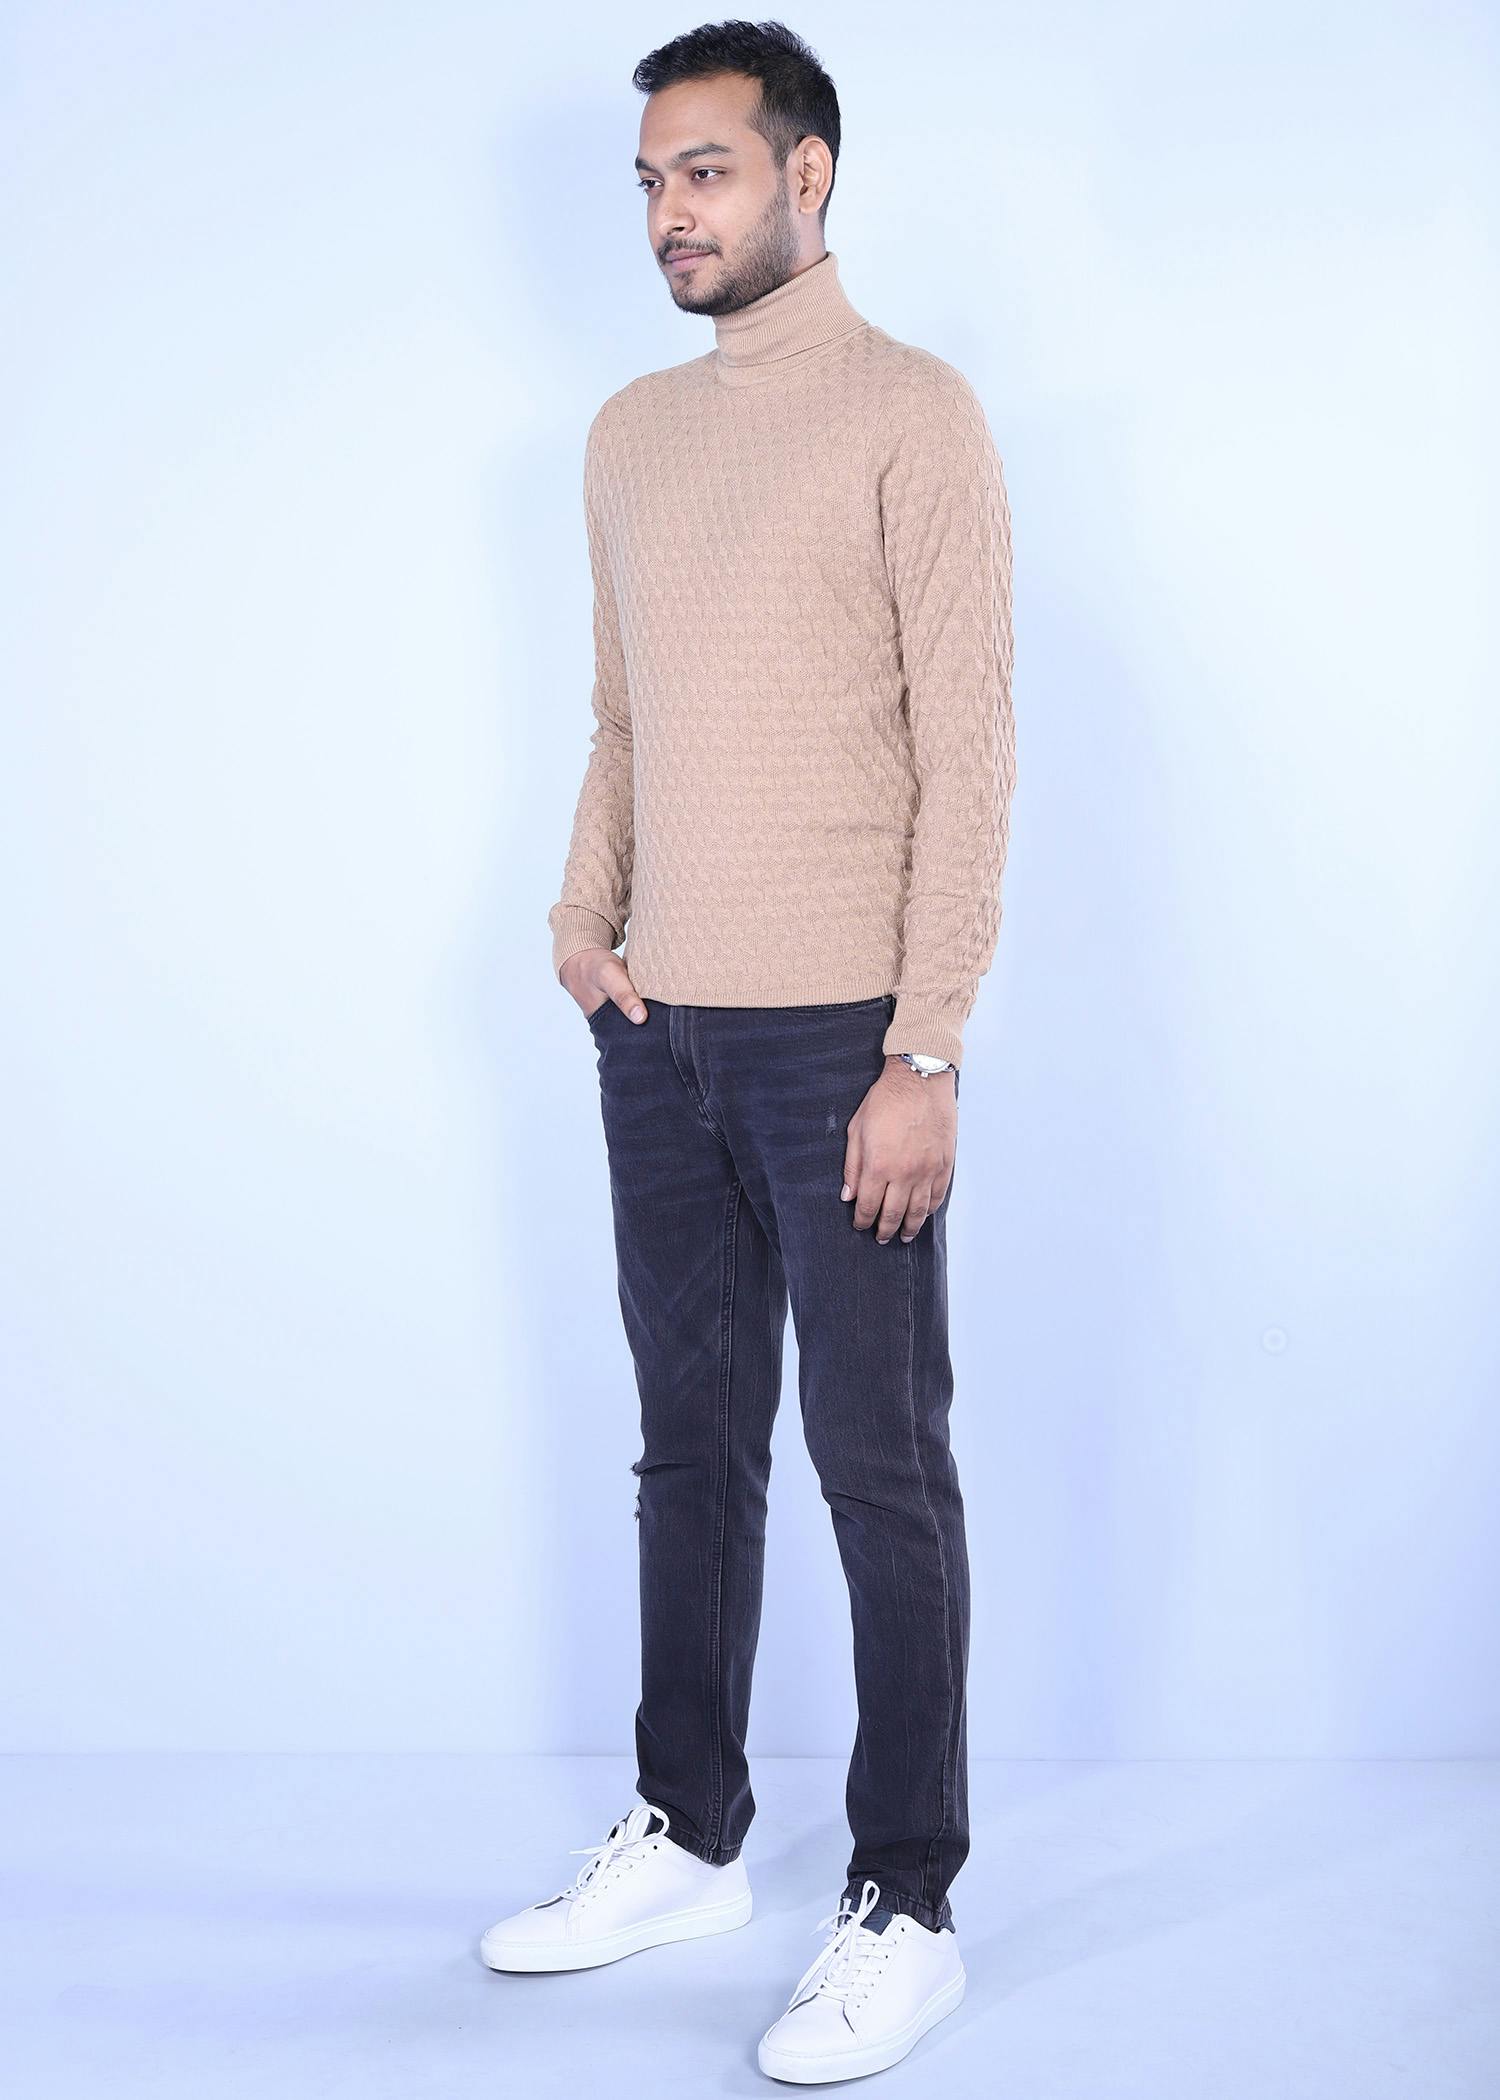 hornero ii sweater camel color side view